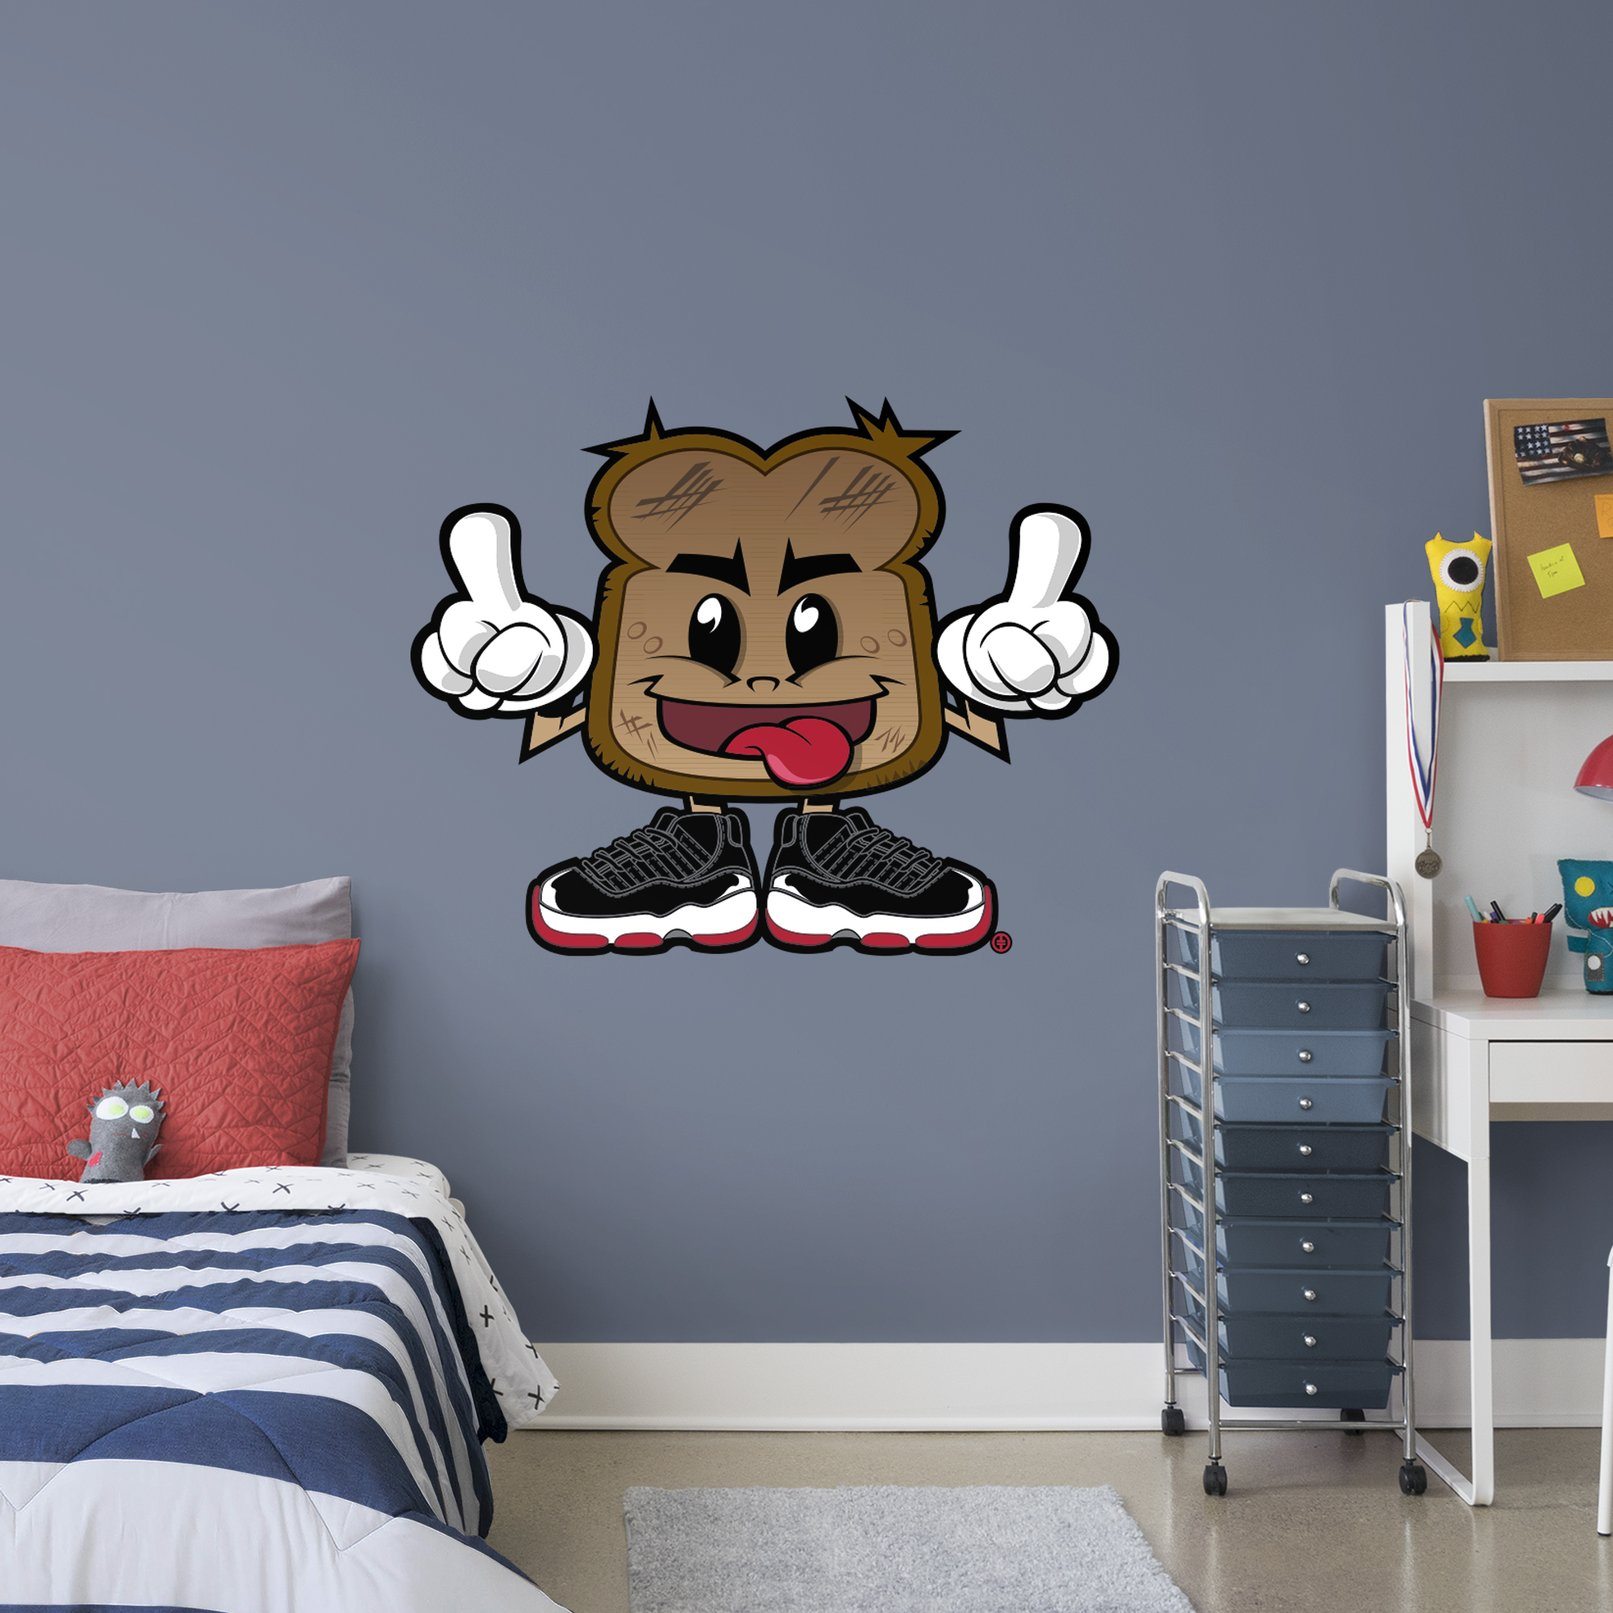 https://fathead.com/collections/tracy-tubera/products/mtt-100?variant=33197932052568